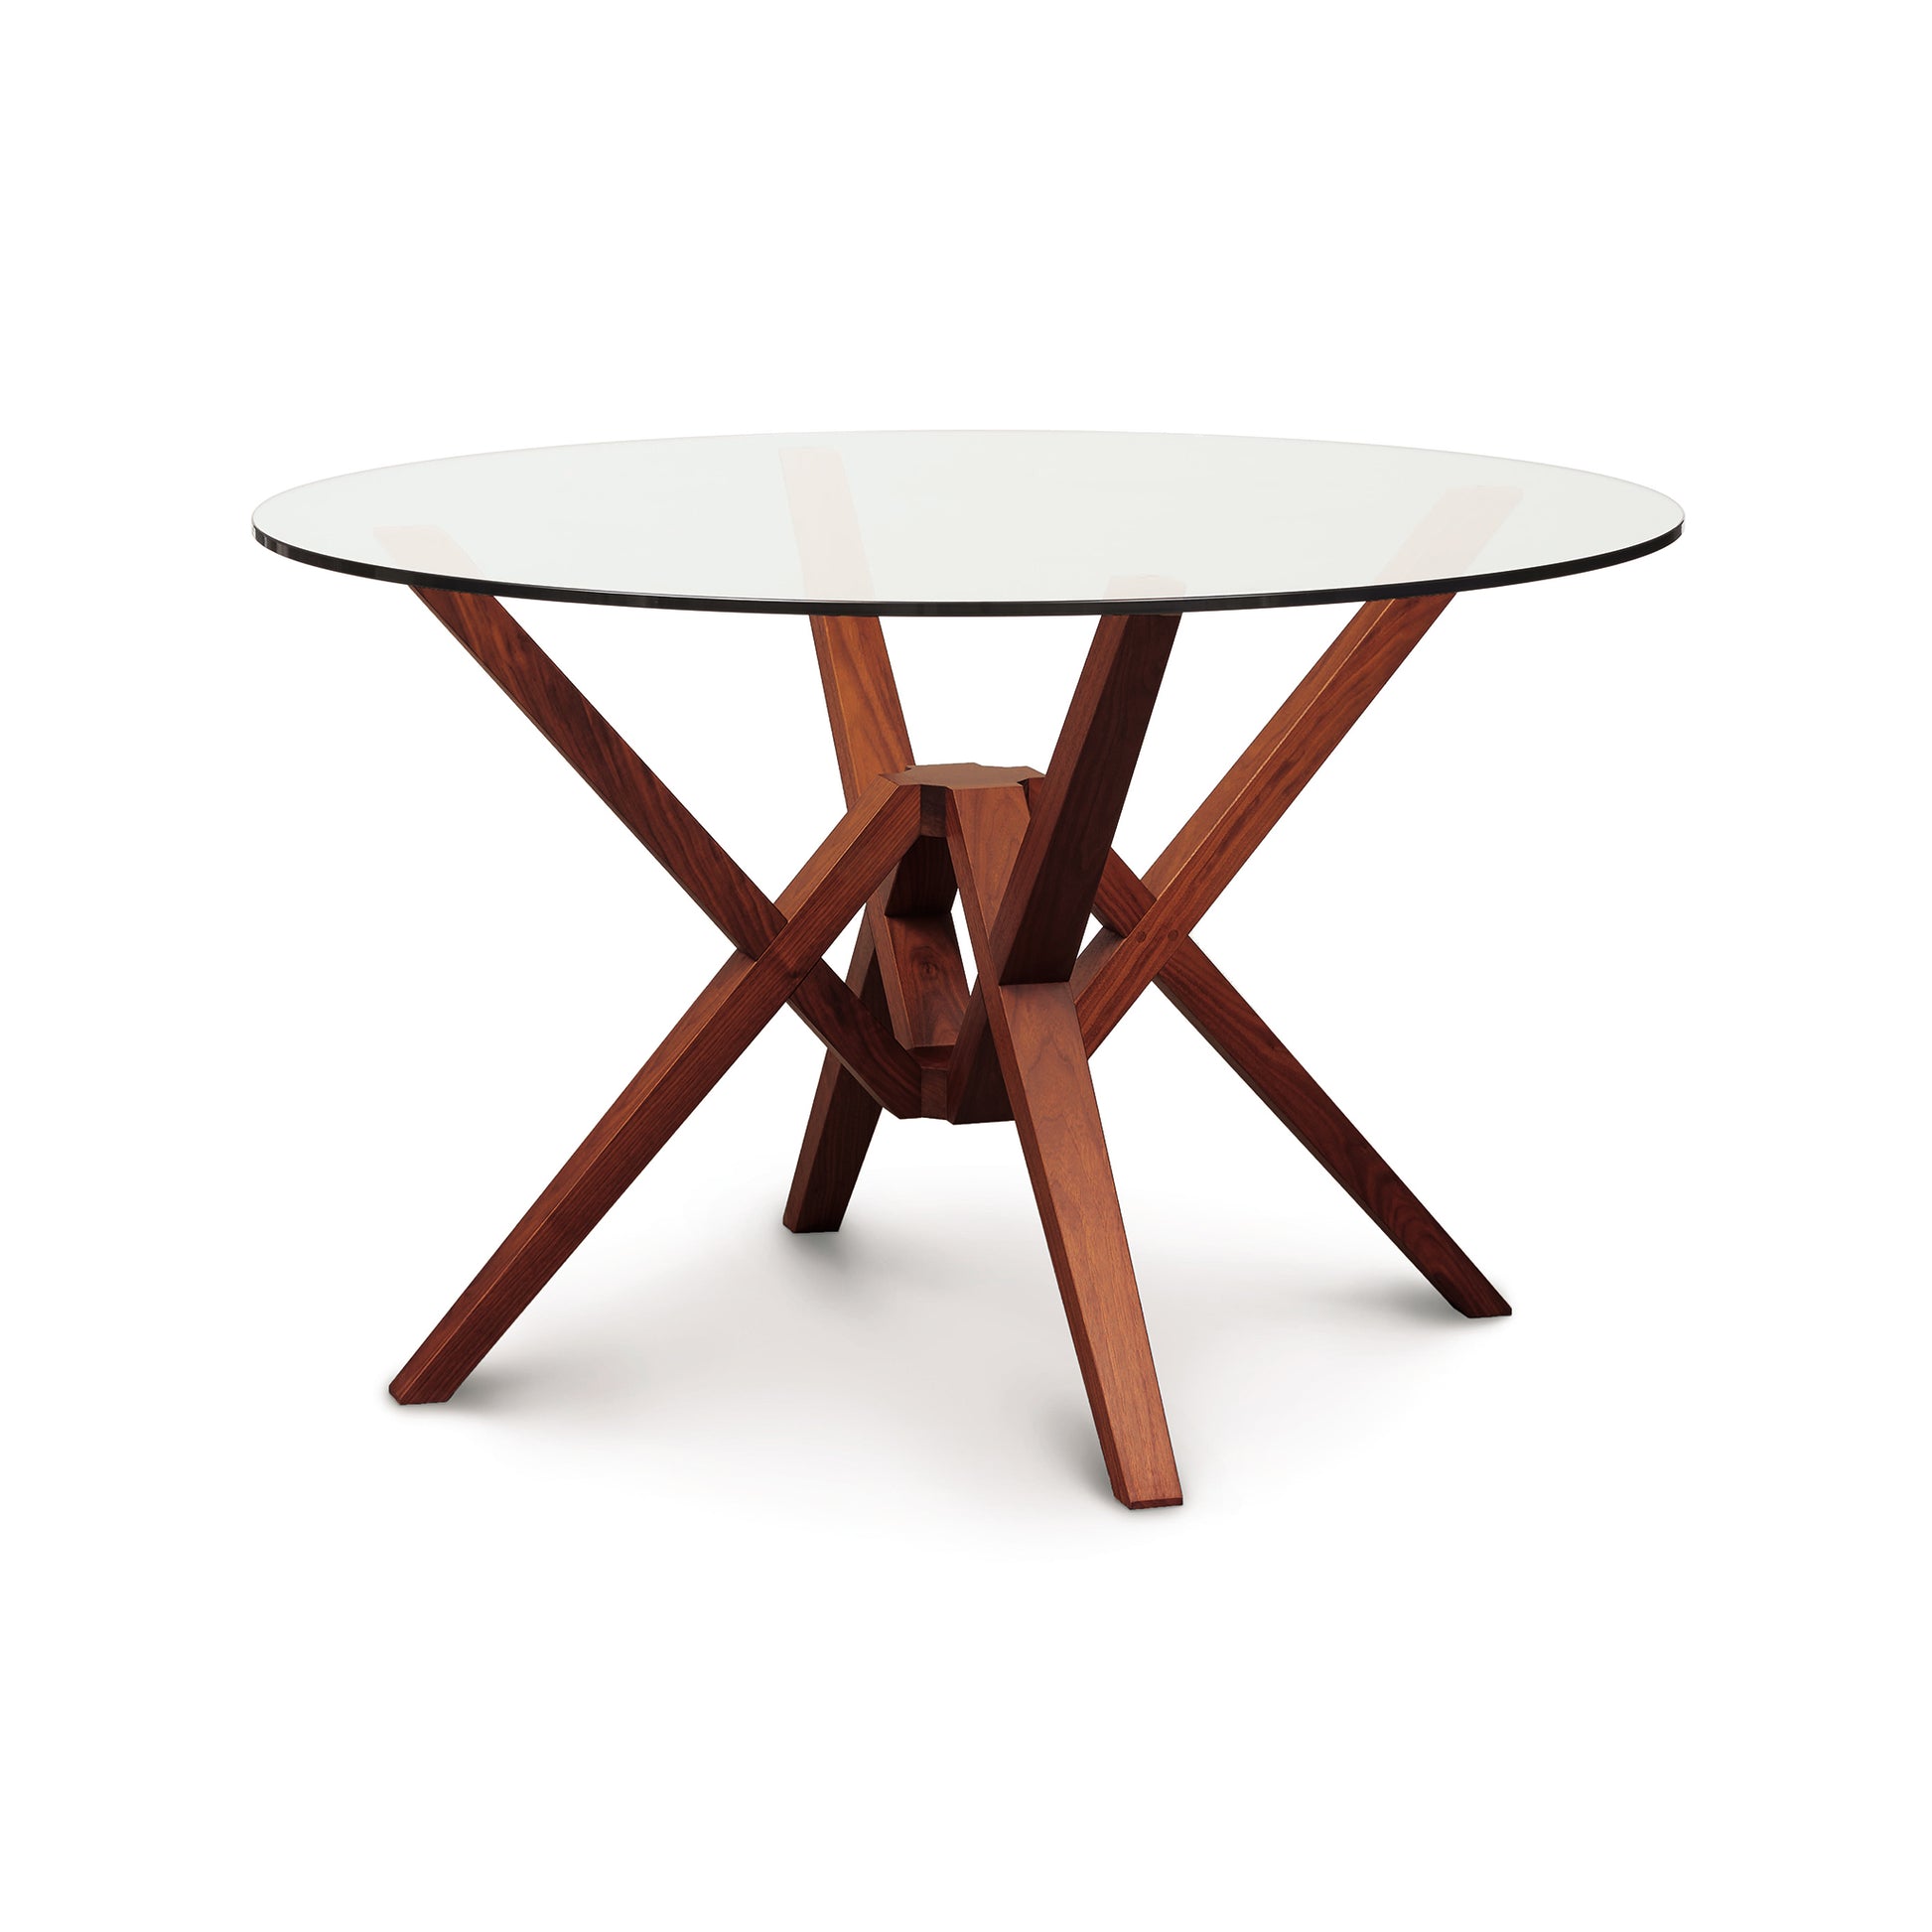 An innovative engineering marvel, the Copeland Furniture Exeter Round Glass Top Table features a beautiful wooden base supporting a sleek glass top. Combining isometric design with durability and style, this table is perfect for